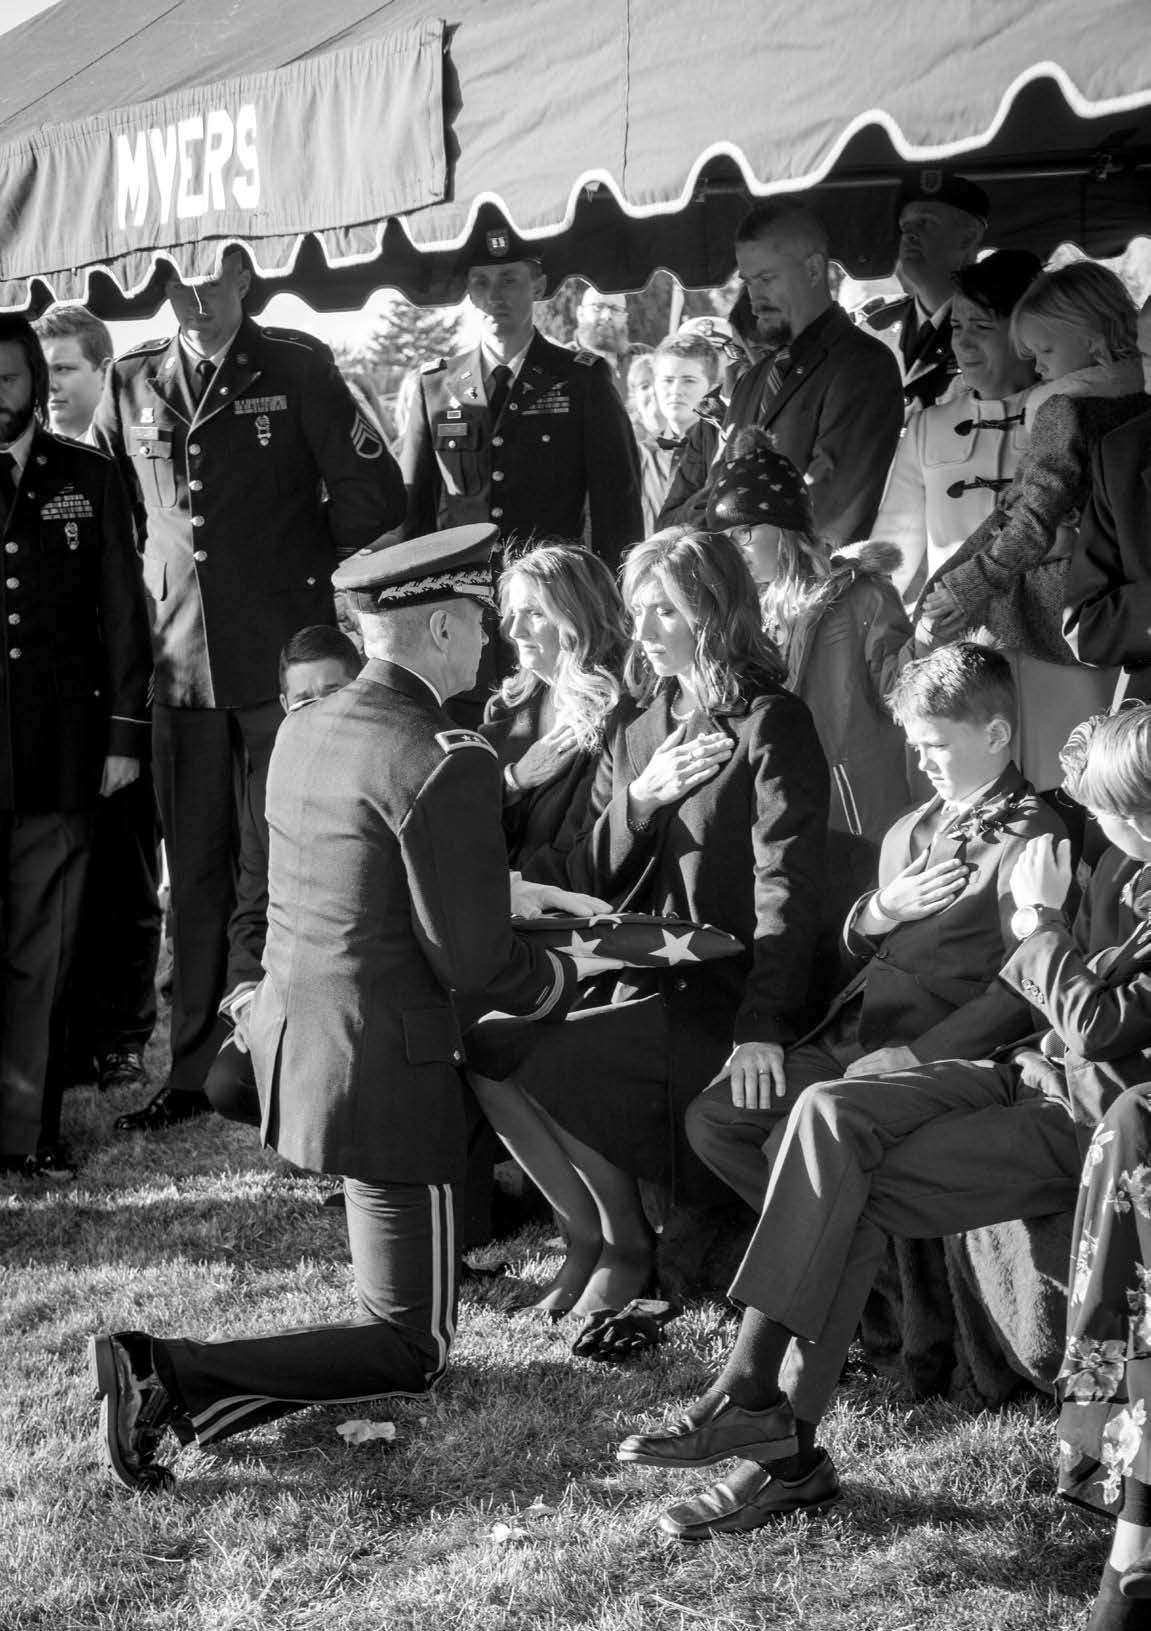 Jennie Taylor, widow of Major Brent Taylor, receives the U.S. flag that draped her husband’s casket from Major General Jefferson S. Burton, the Adjutant General of the Utah National Guard, in November 2018. Courtesy of Westbroek Studios.